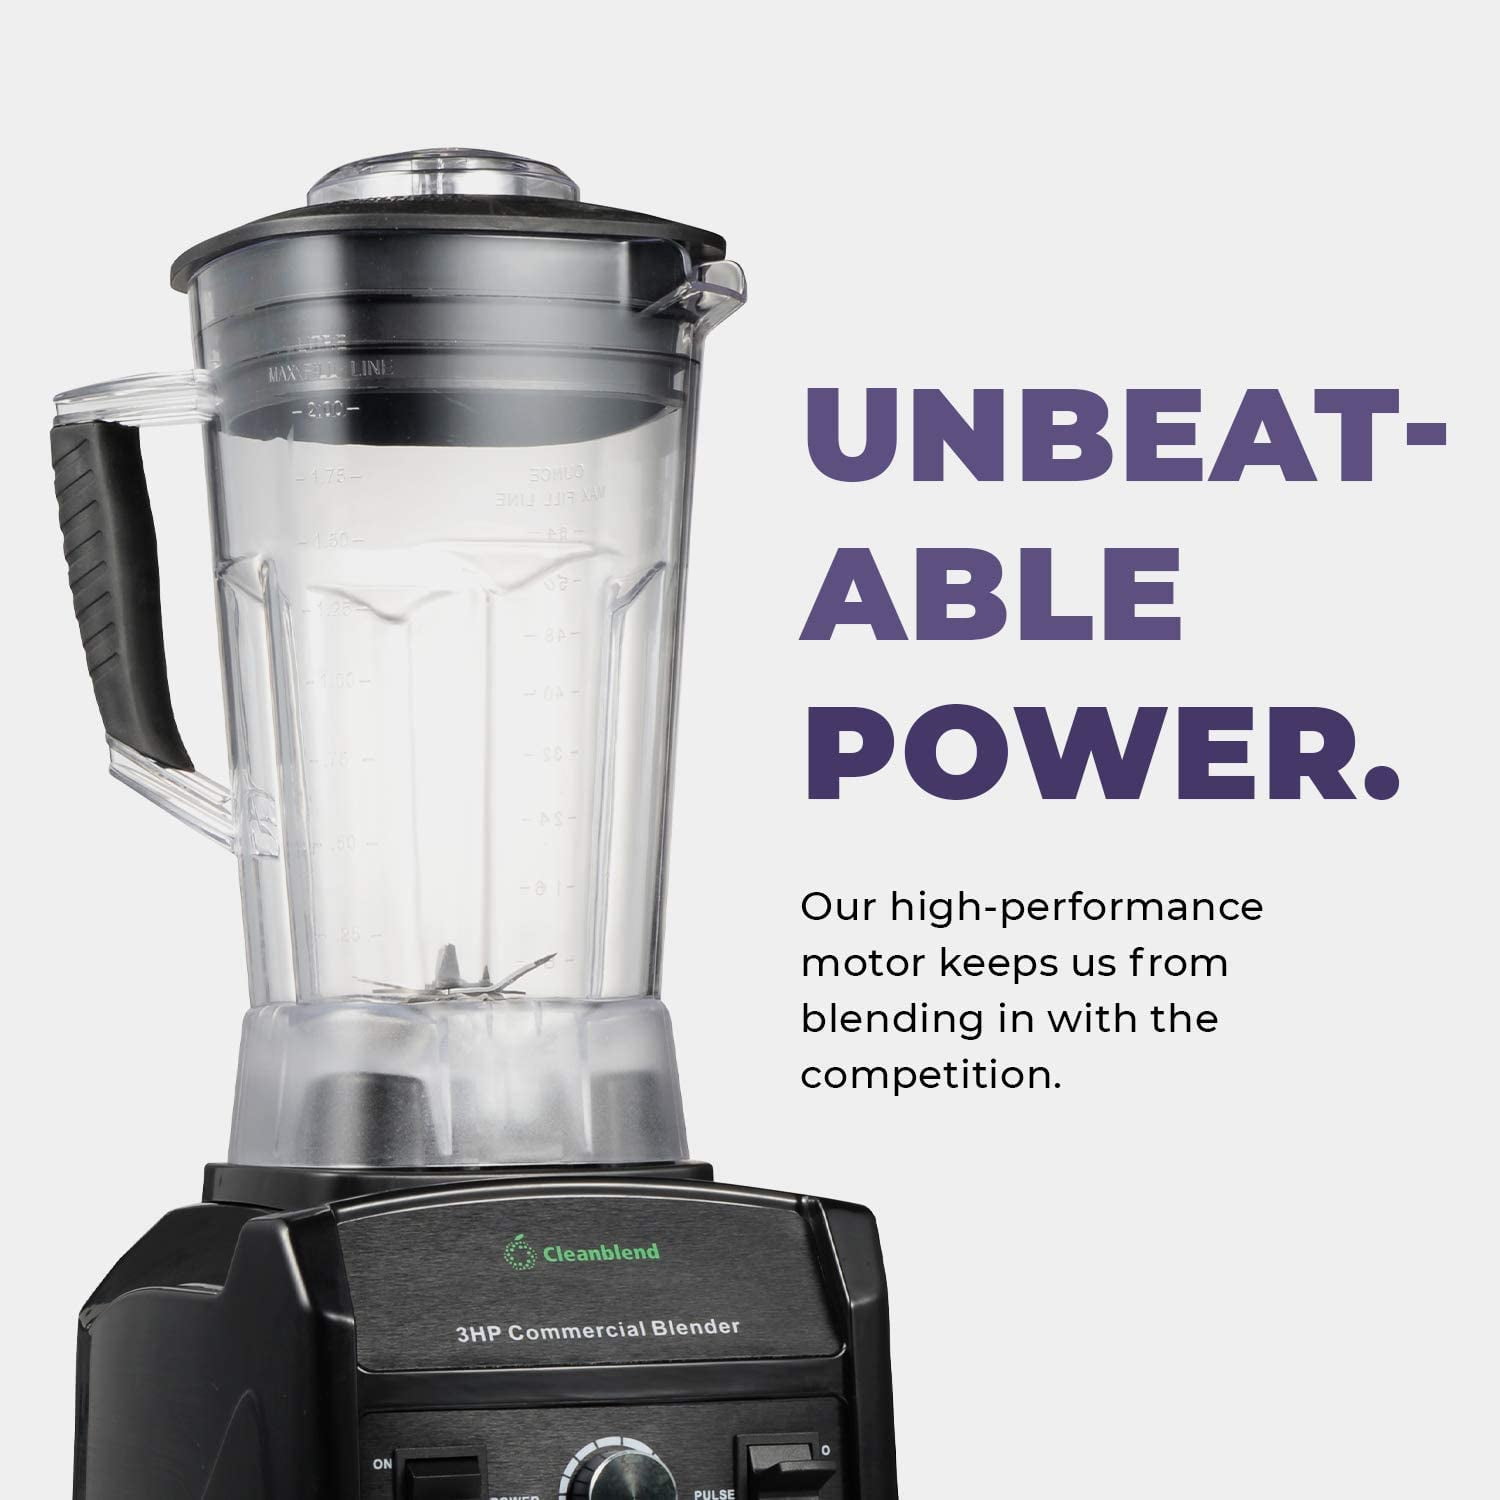 Cleanblend ULTRA: A Low Profile Countertop Blender With A BPA Free 40 oz.  Container, A Stainless Steel 8 Blade System and stainless steel drivetrain.  Great for smoothies, nut butters and mixing 